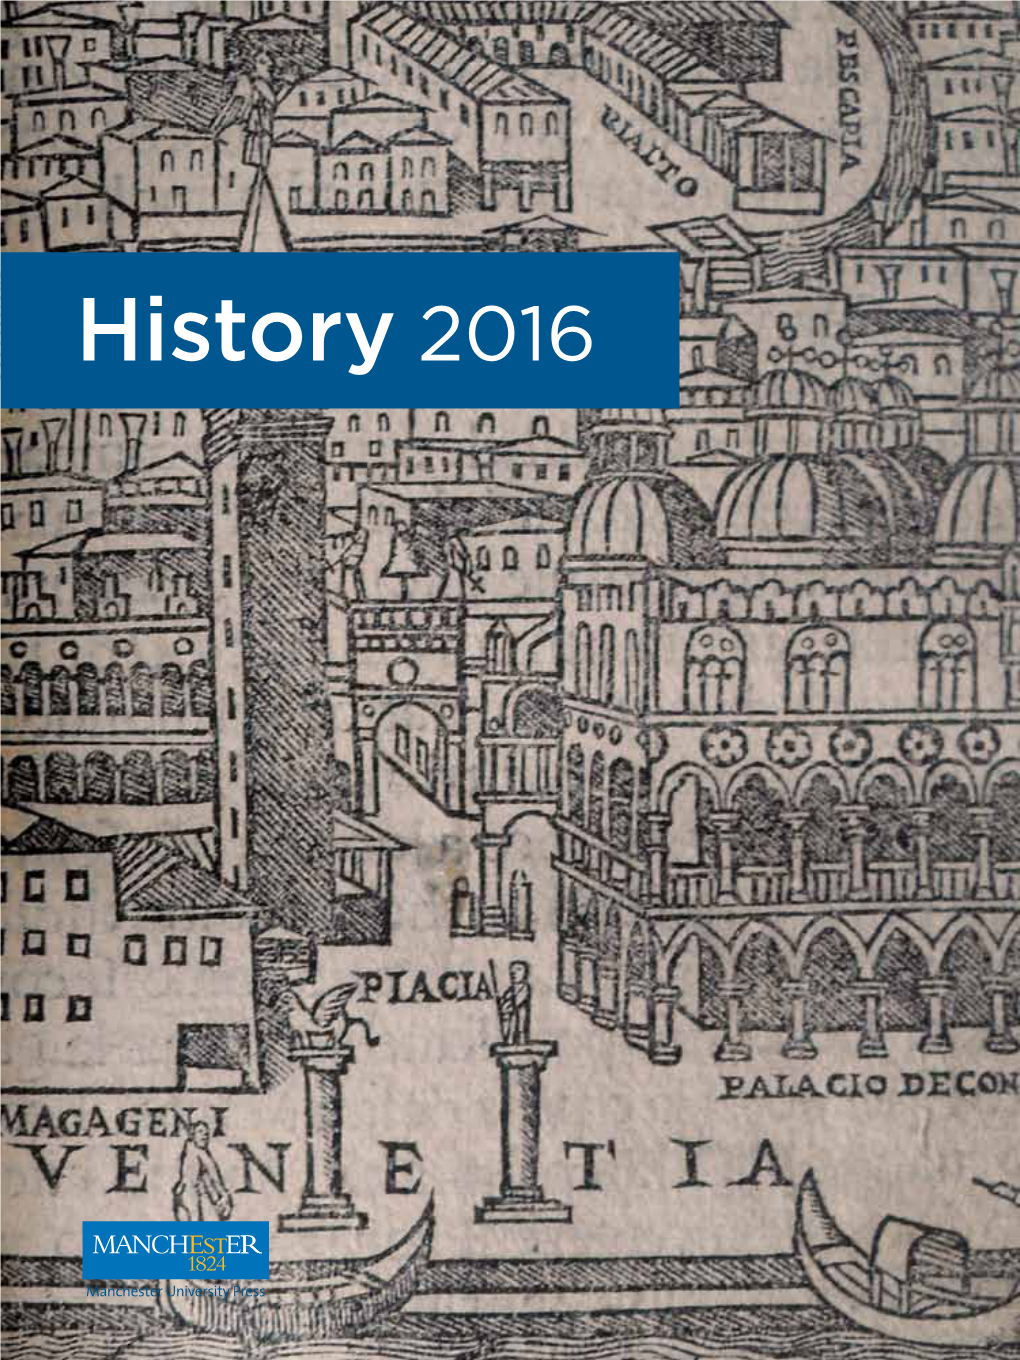 History 2016 Contents